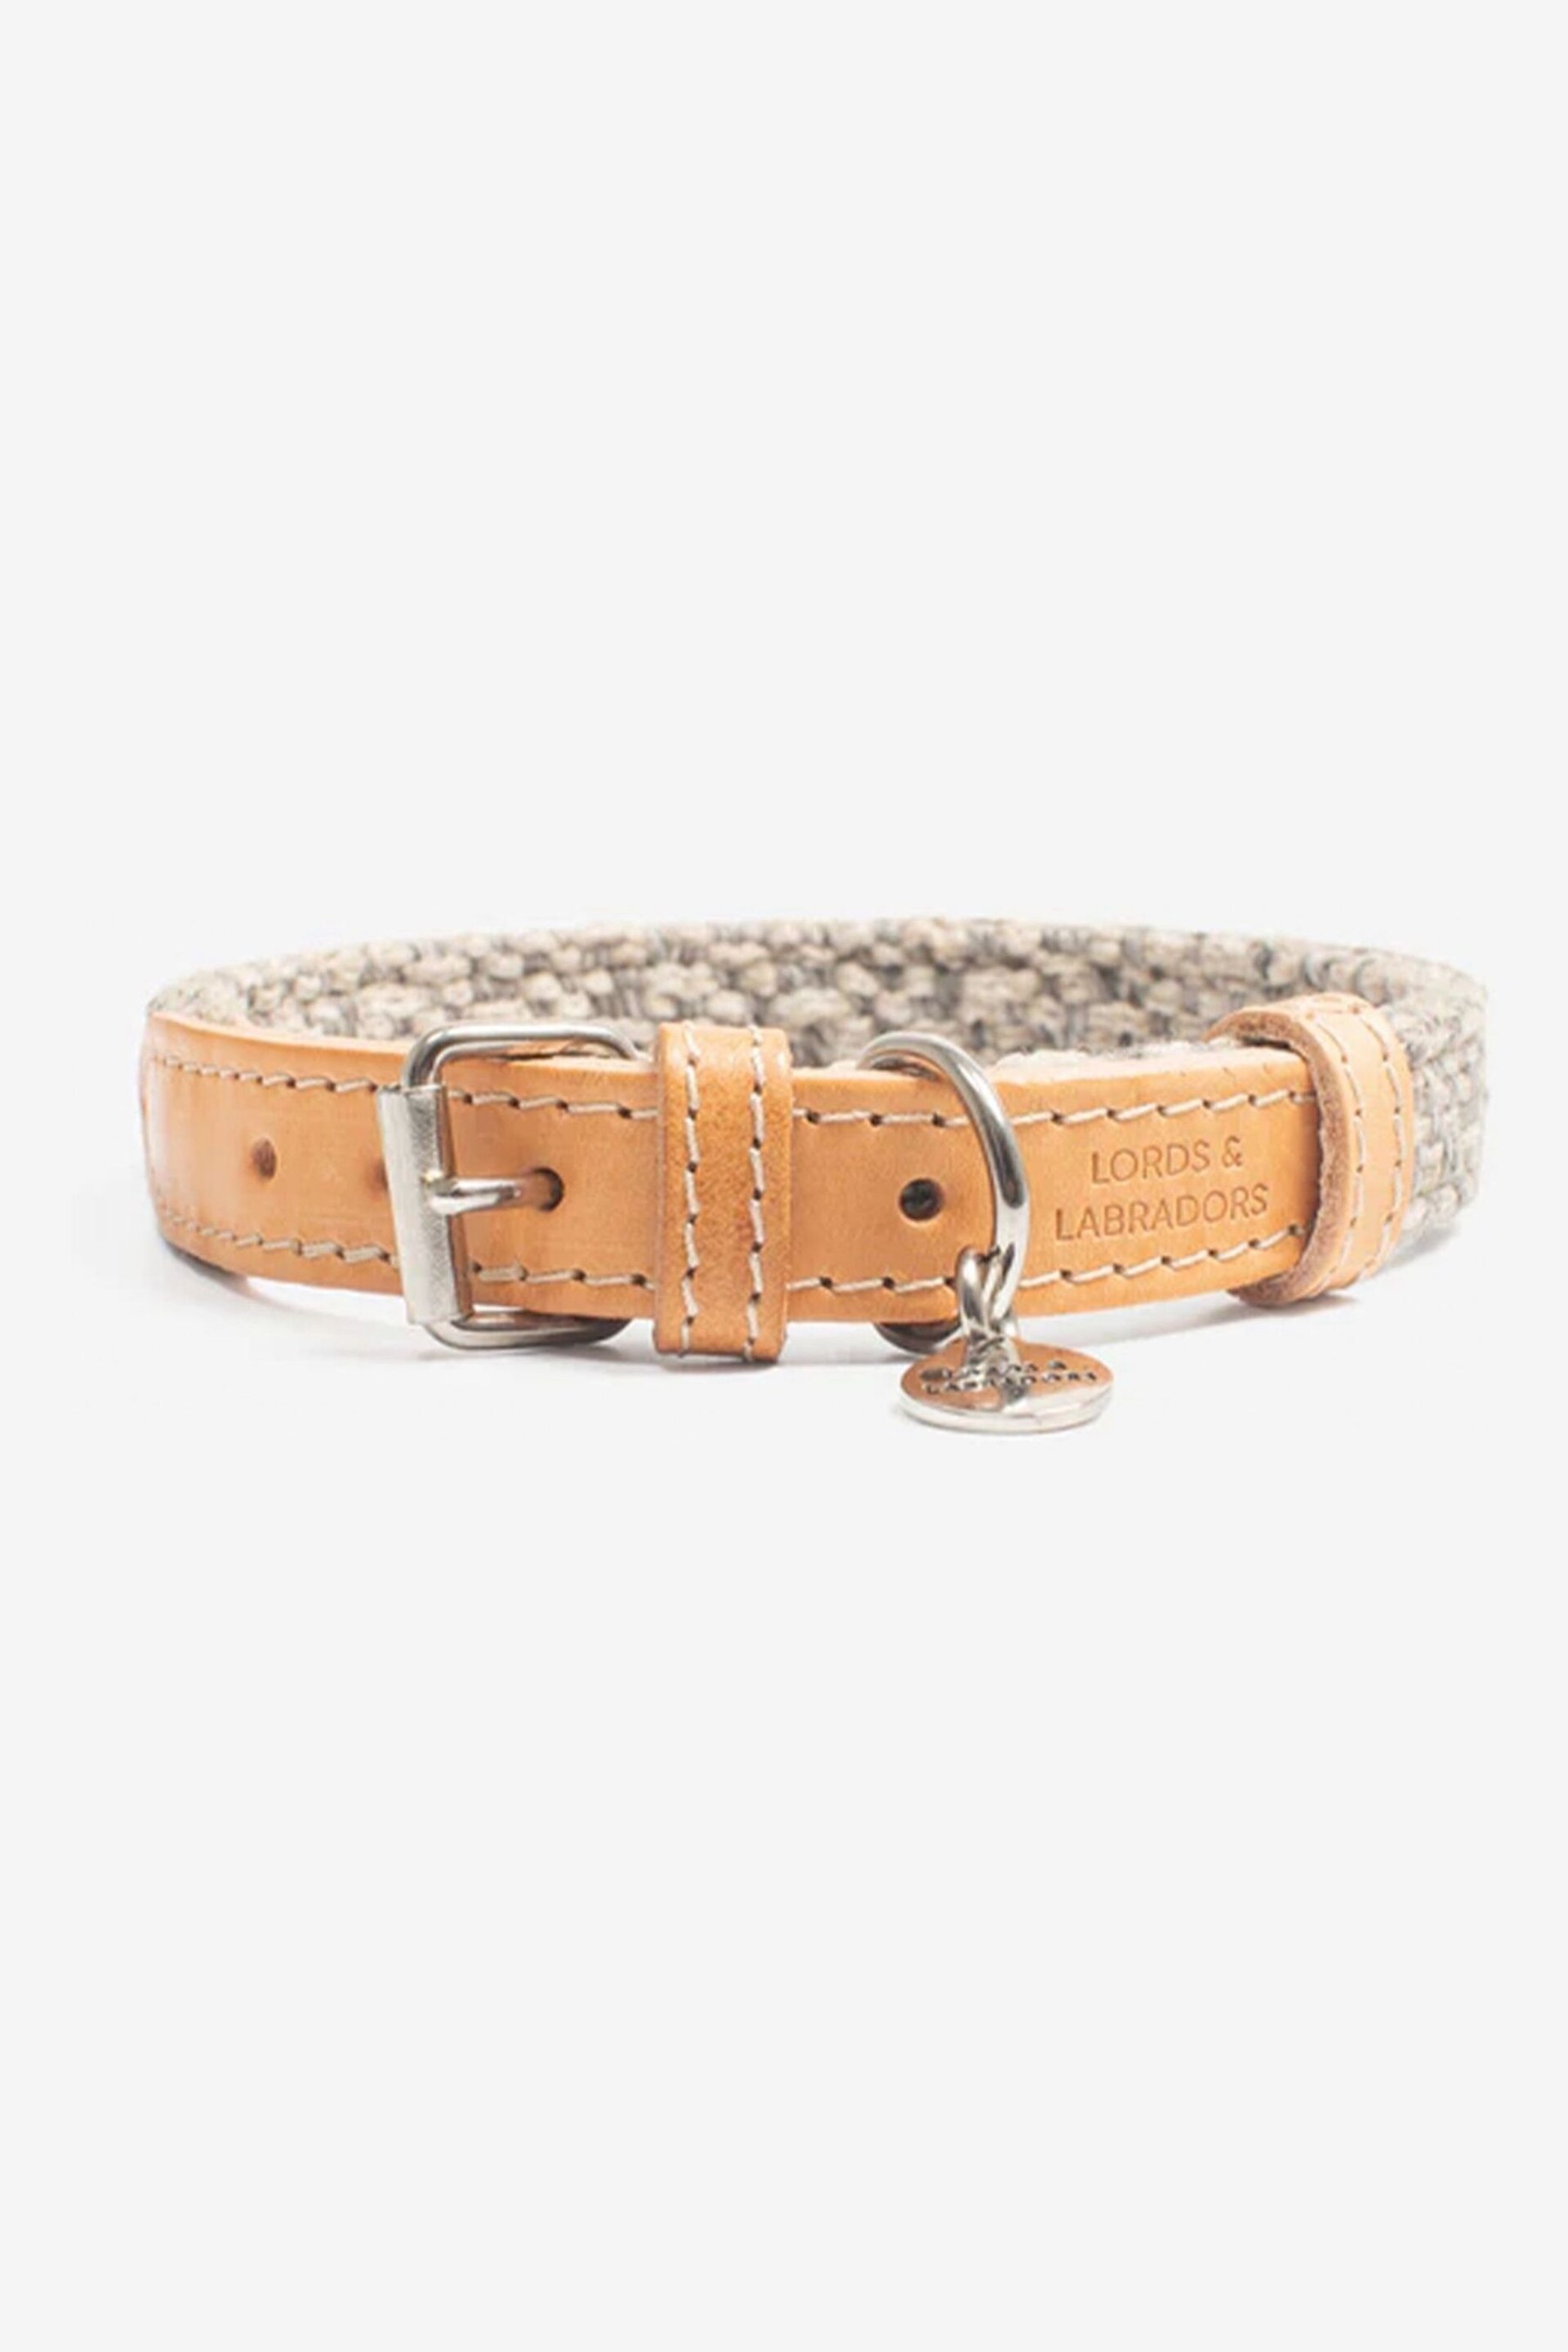 Lords and Labradors Pebble Essentials Herdwick Dog Collar - Image 2 of 6